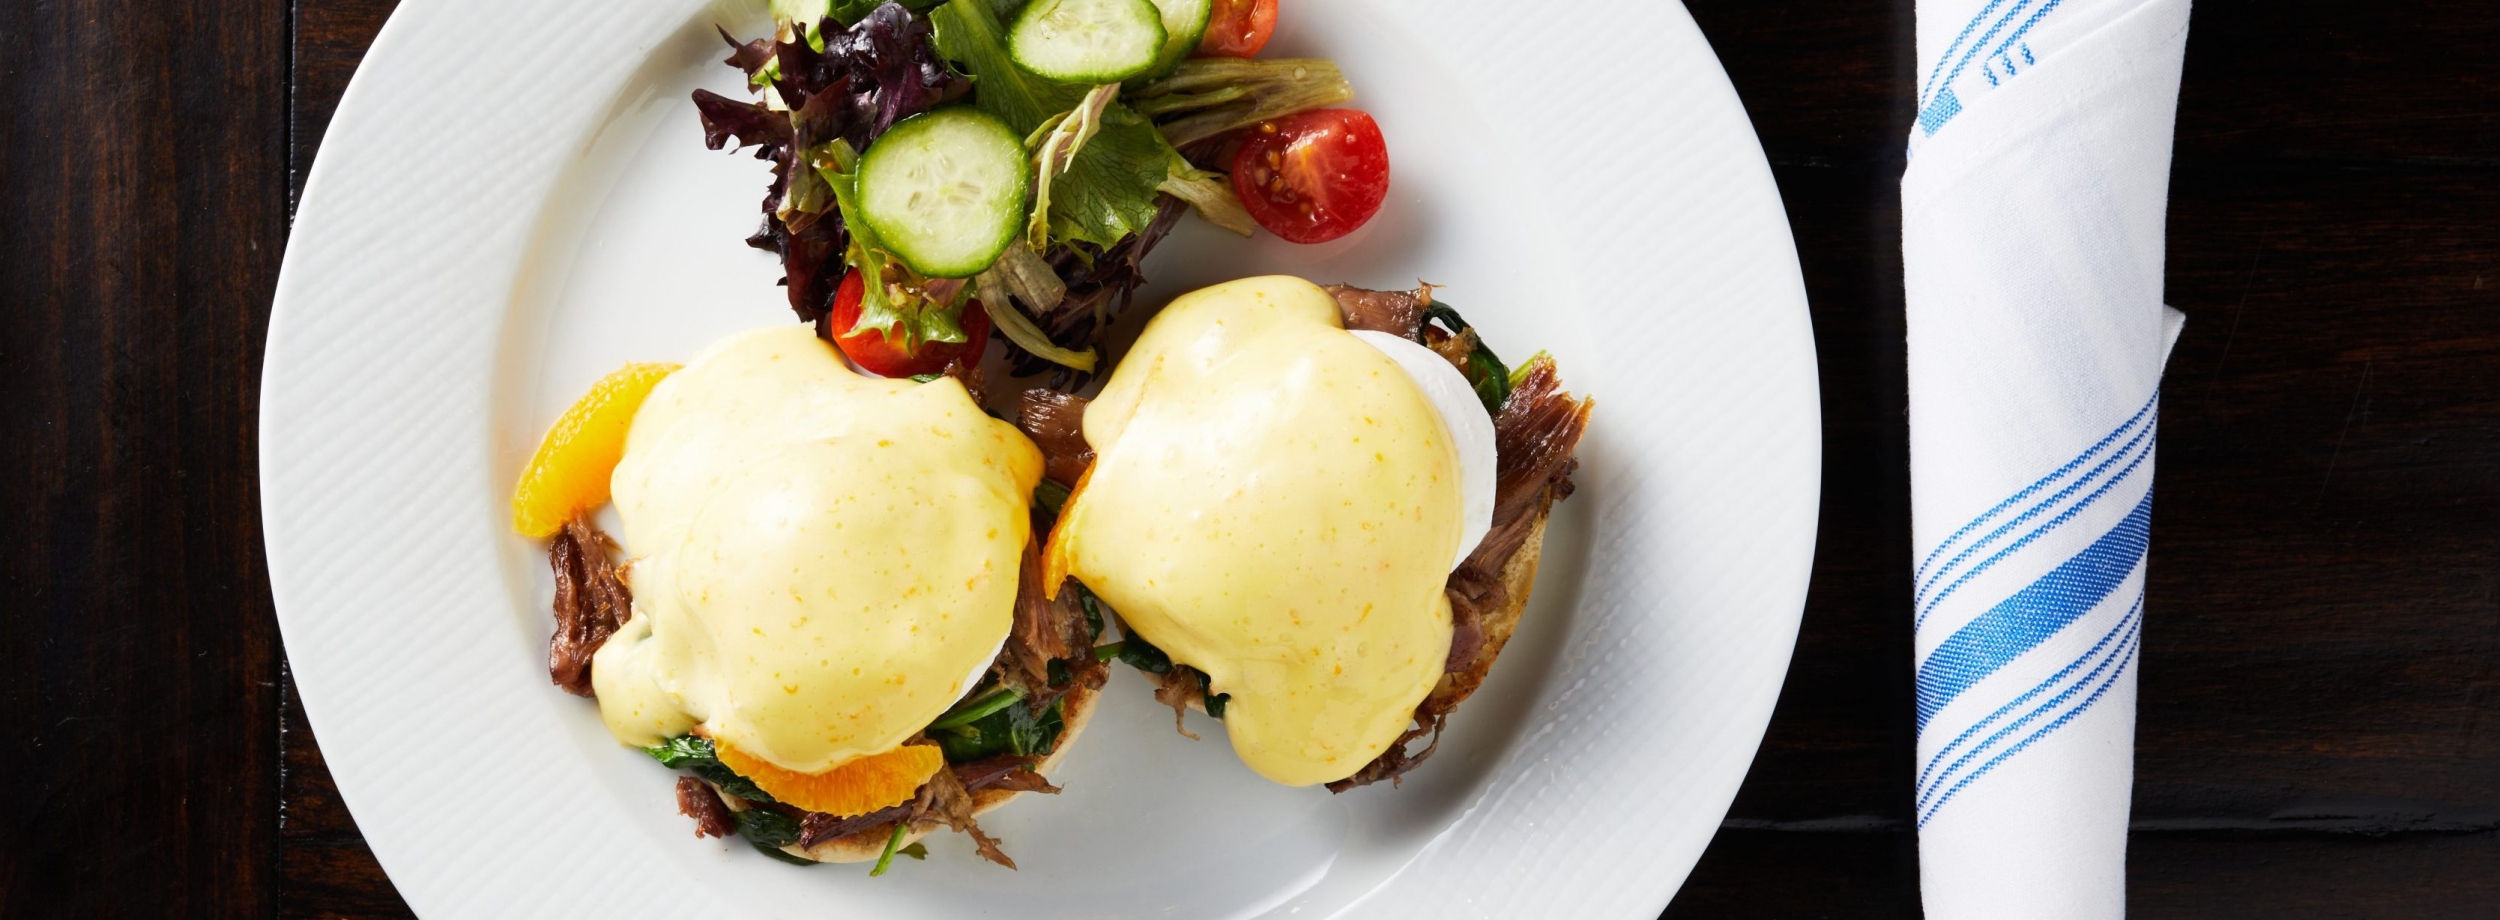 Eggs Benedict from the brunch menu at Couvant in New Orleans